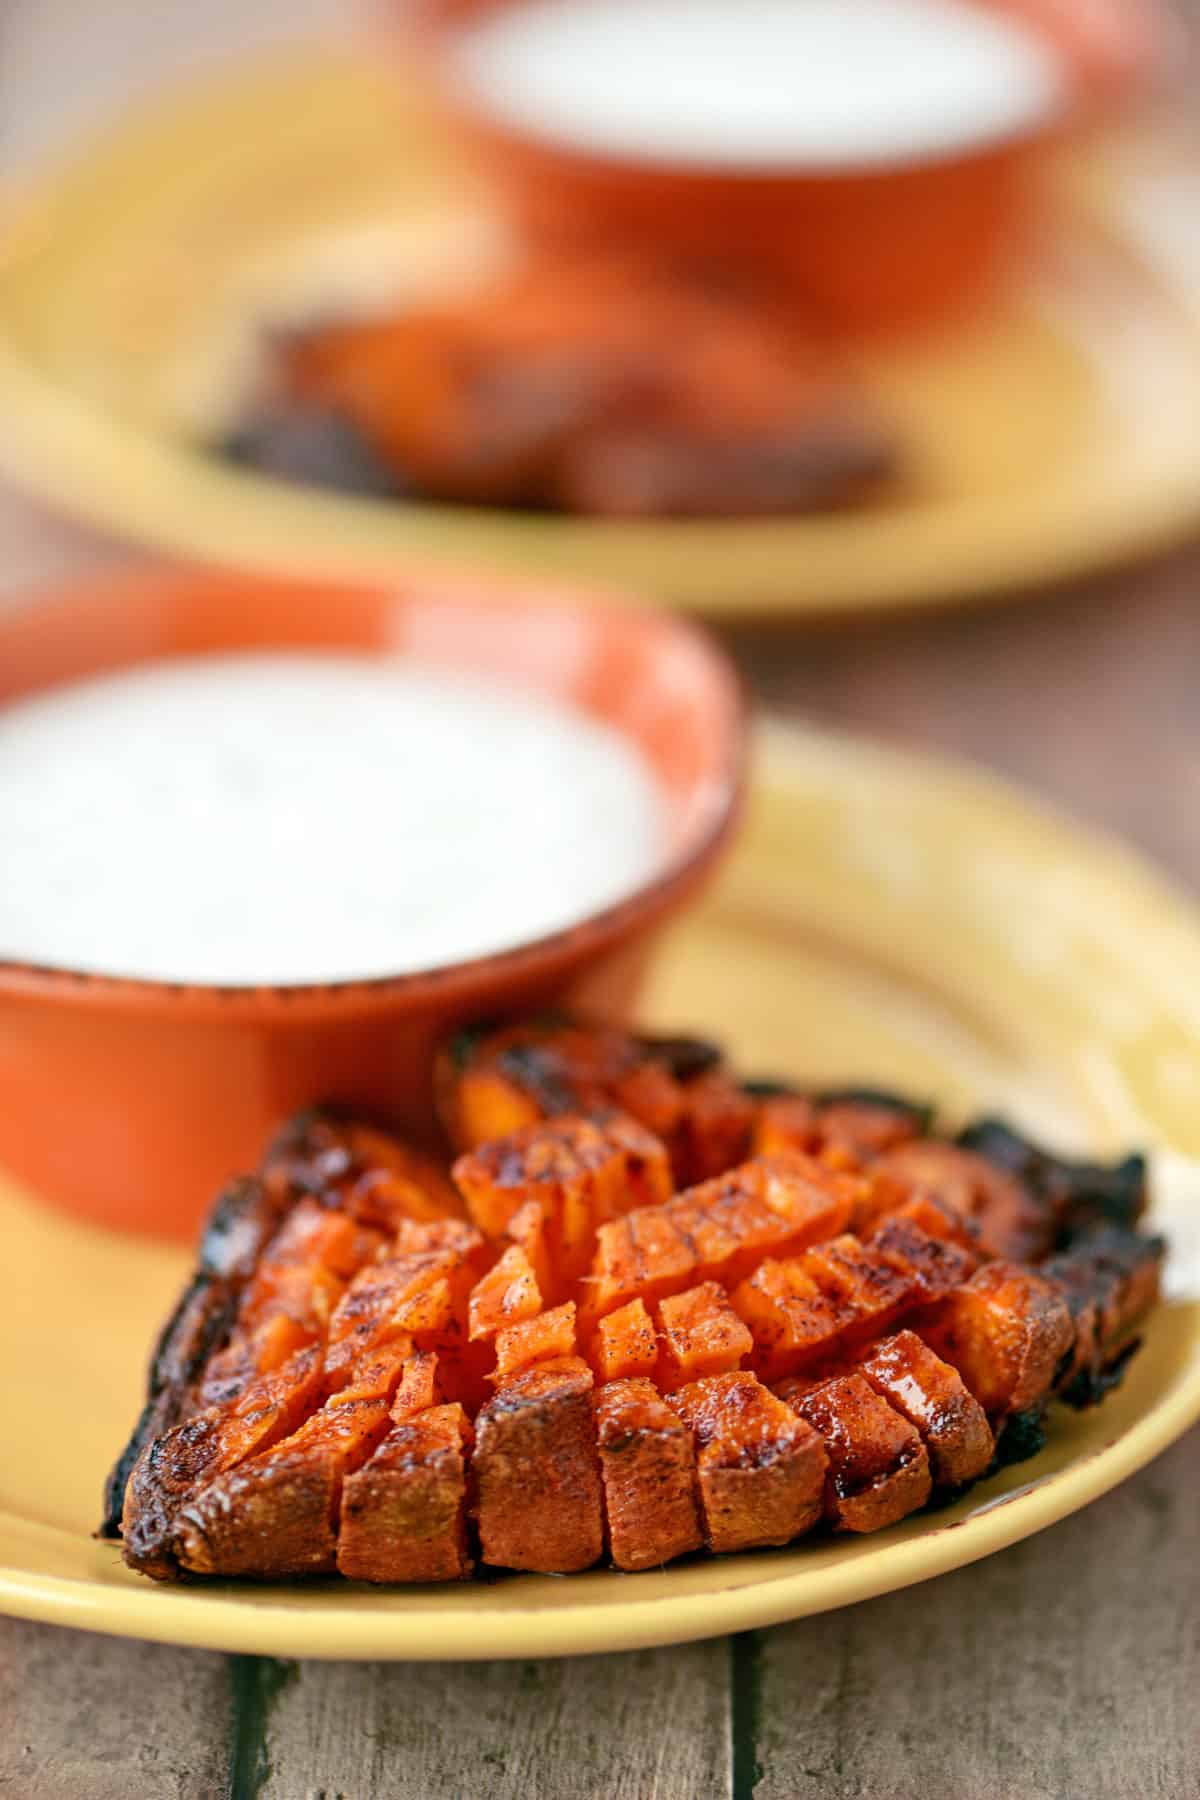 A bloomin sweet potato on a plate.